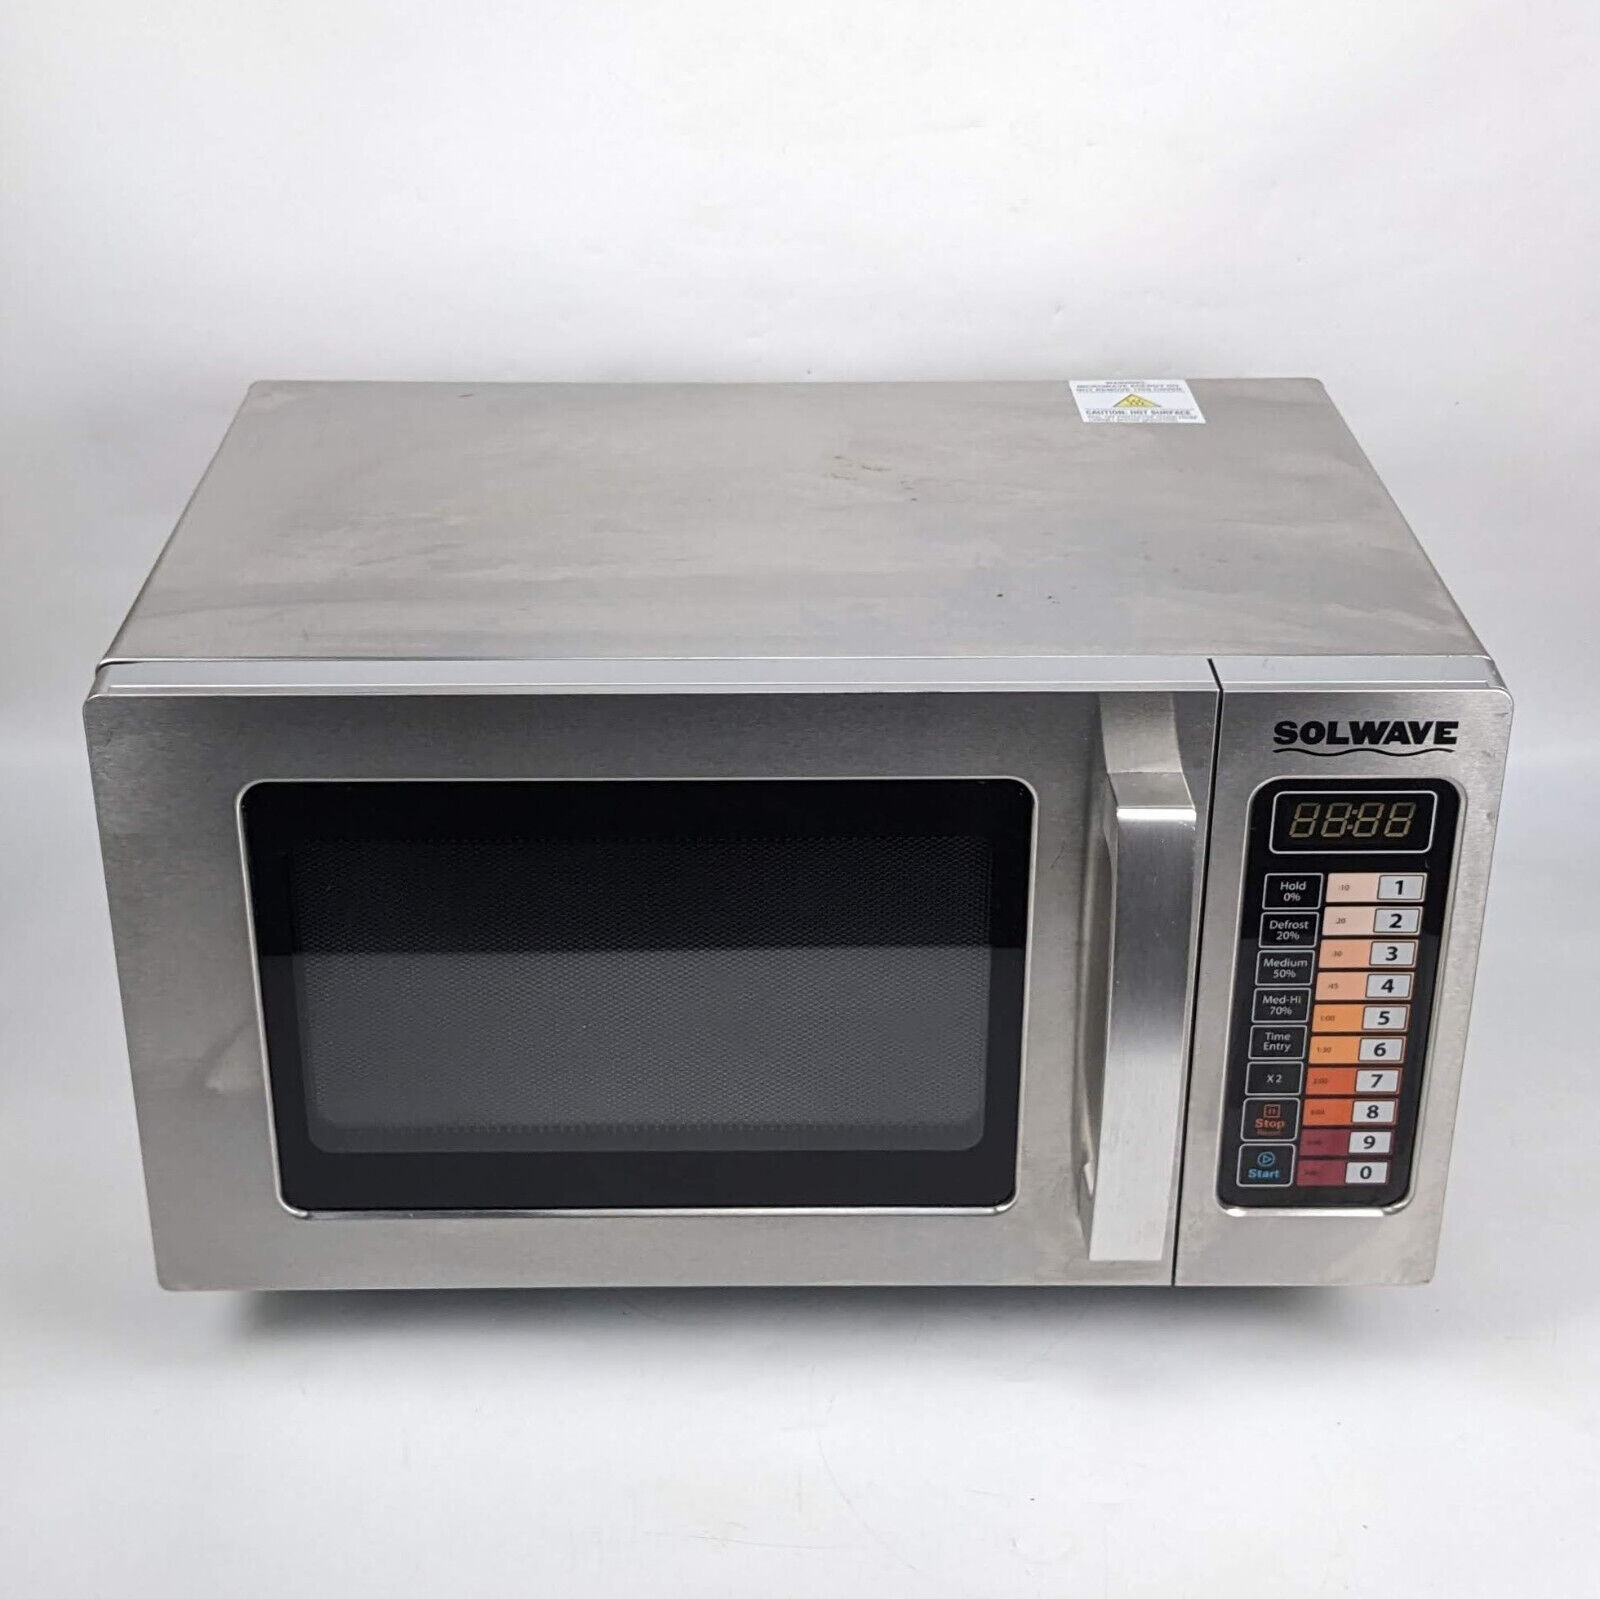 Solwave 1000W Stainless Steel Commerical Microwave - 0.9cuft